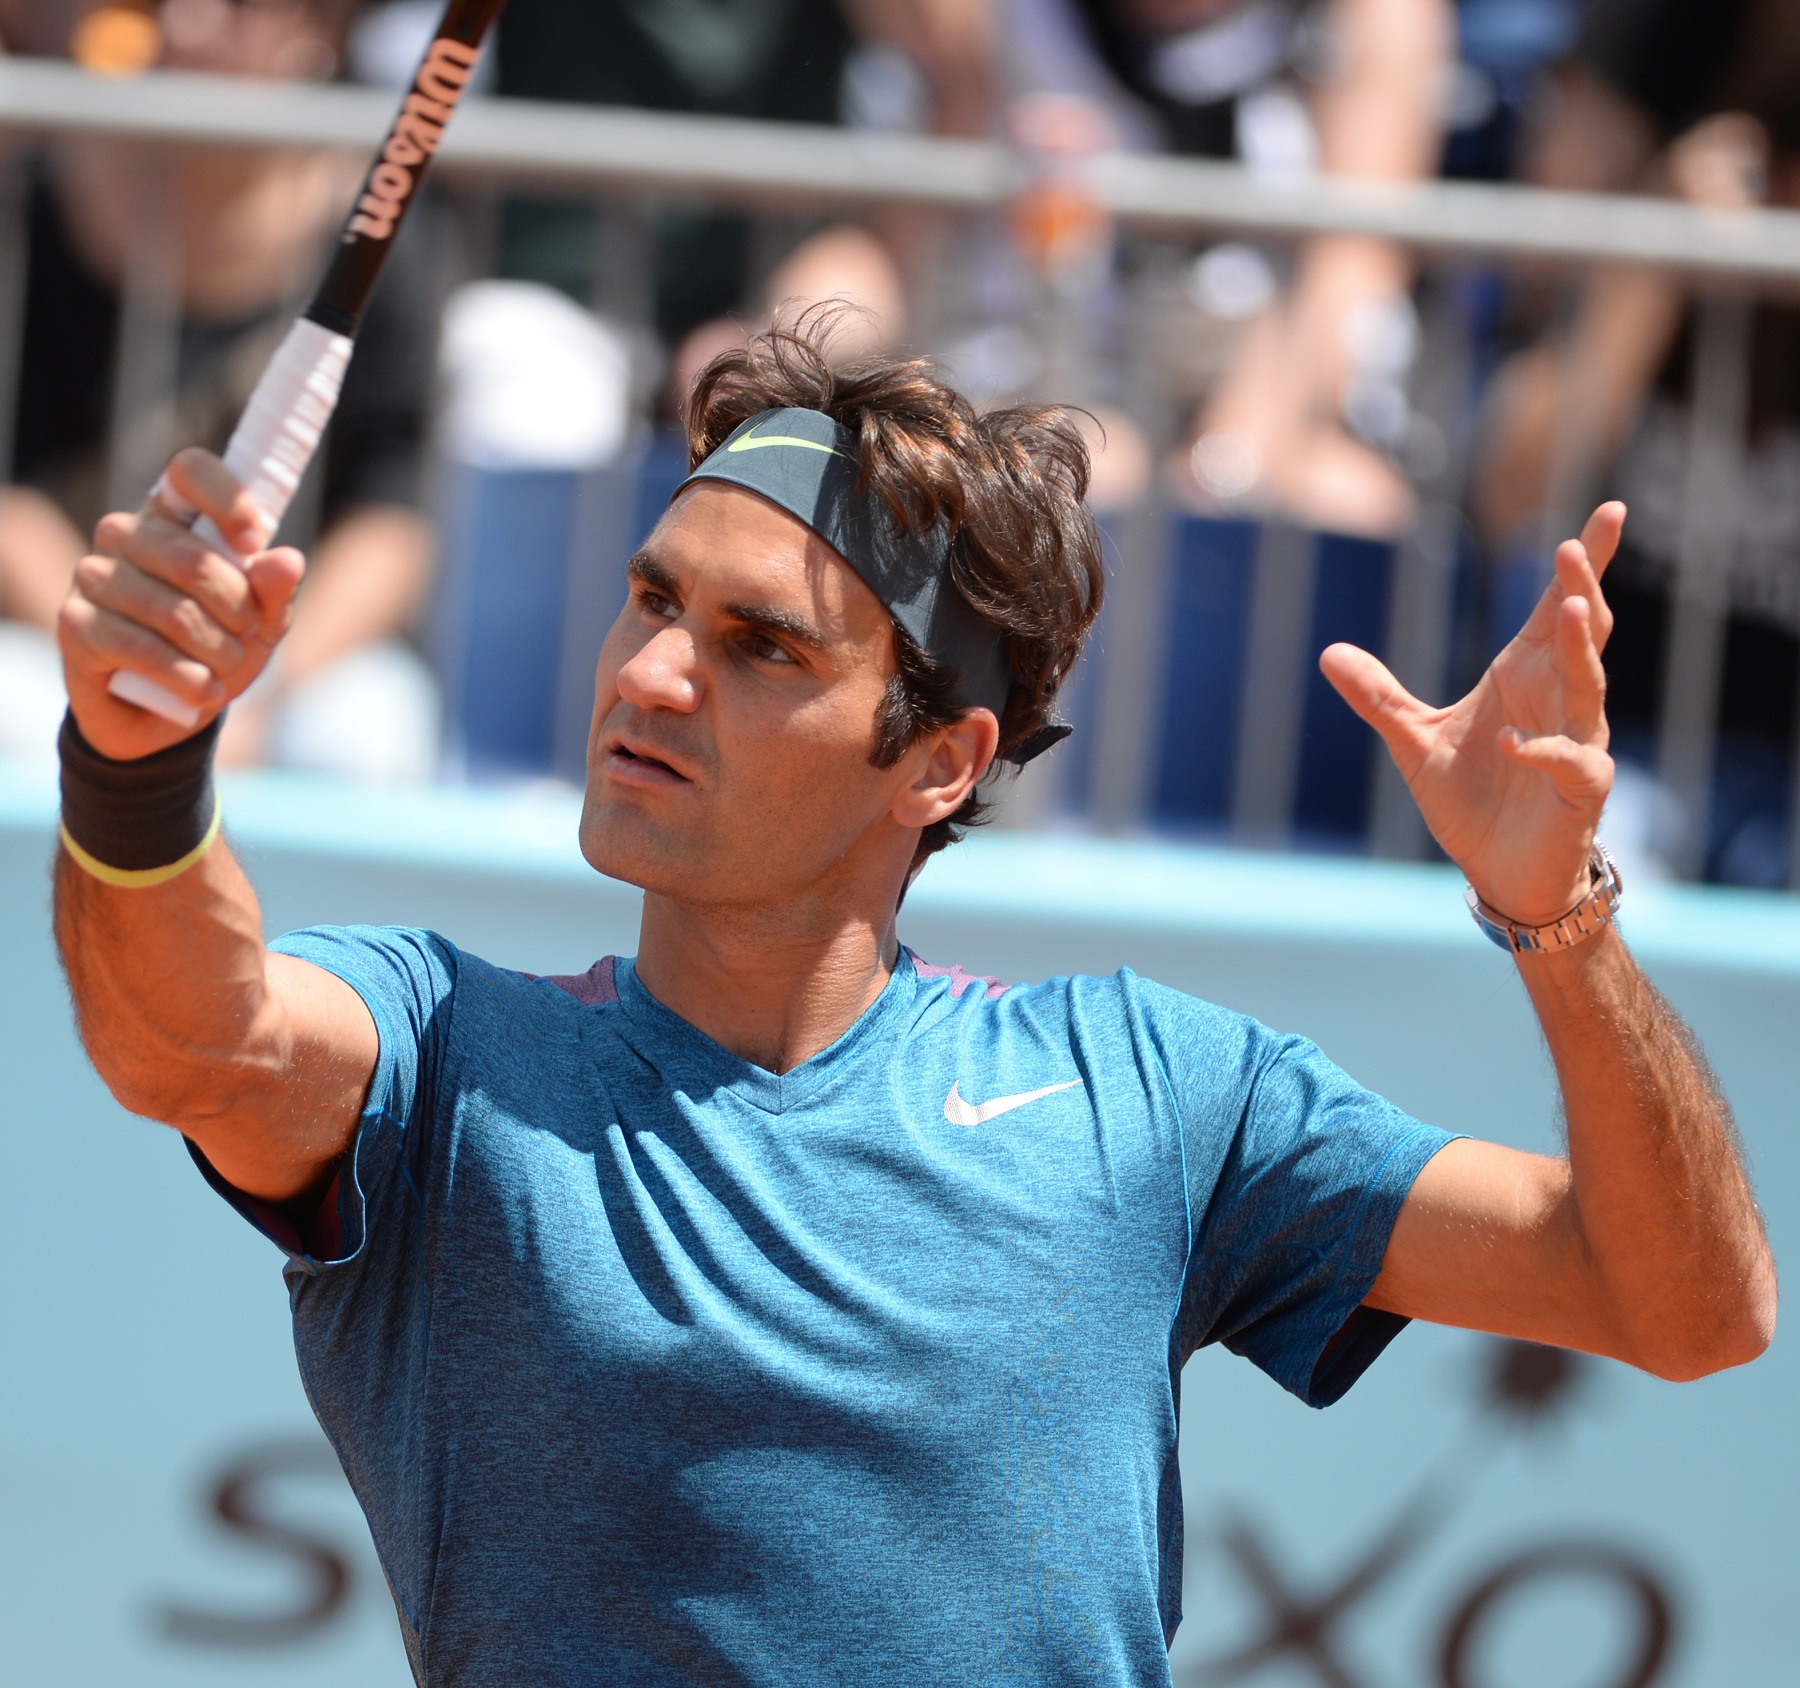 Tennis-Leg injury forces Federer out of Rome quarters